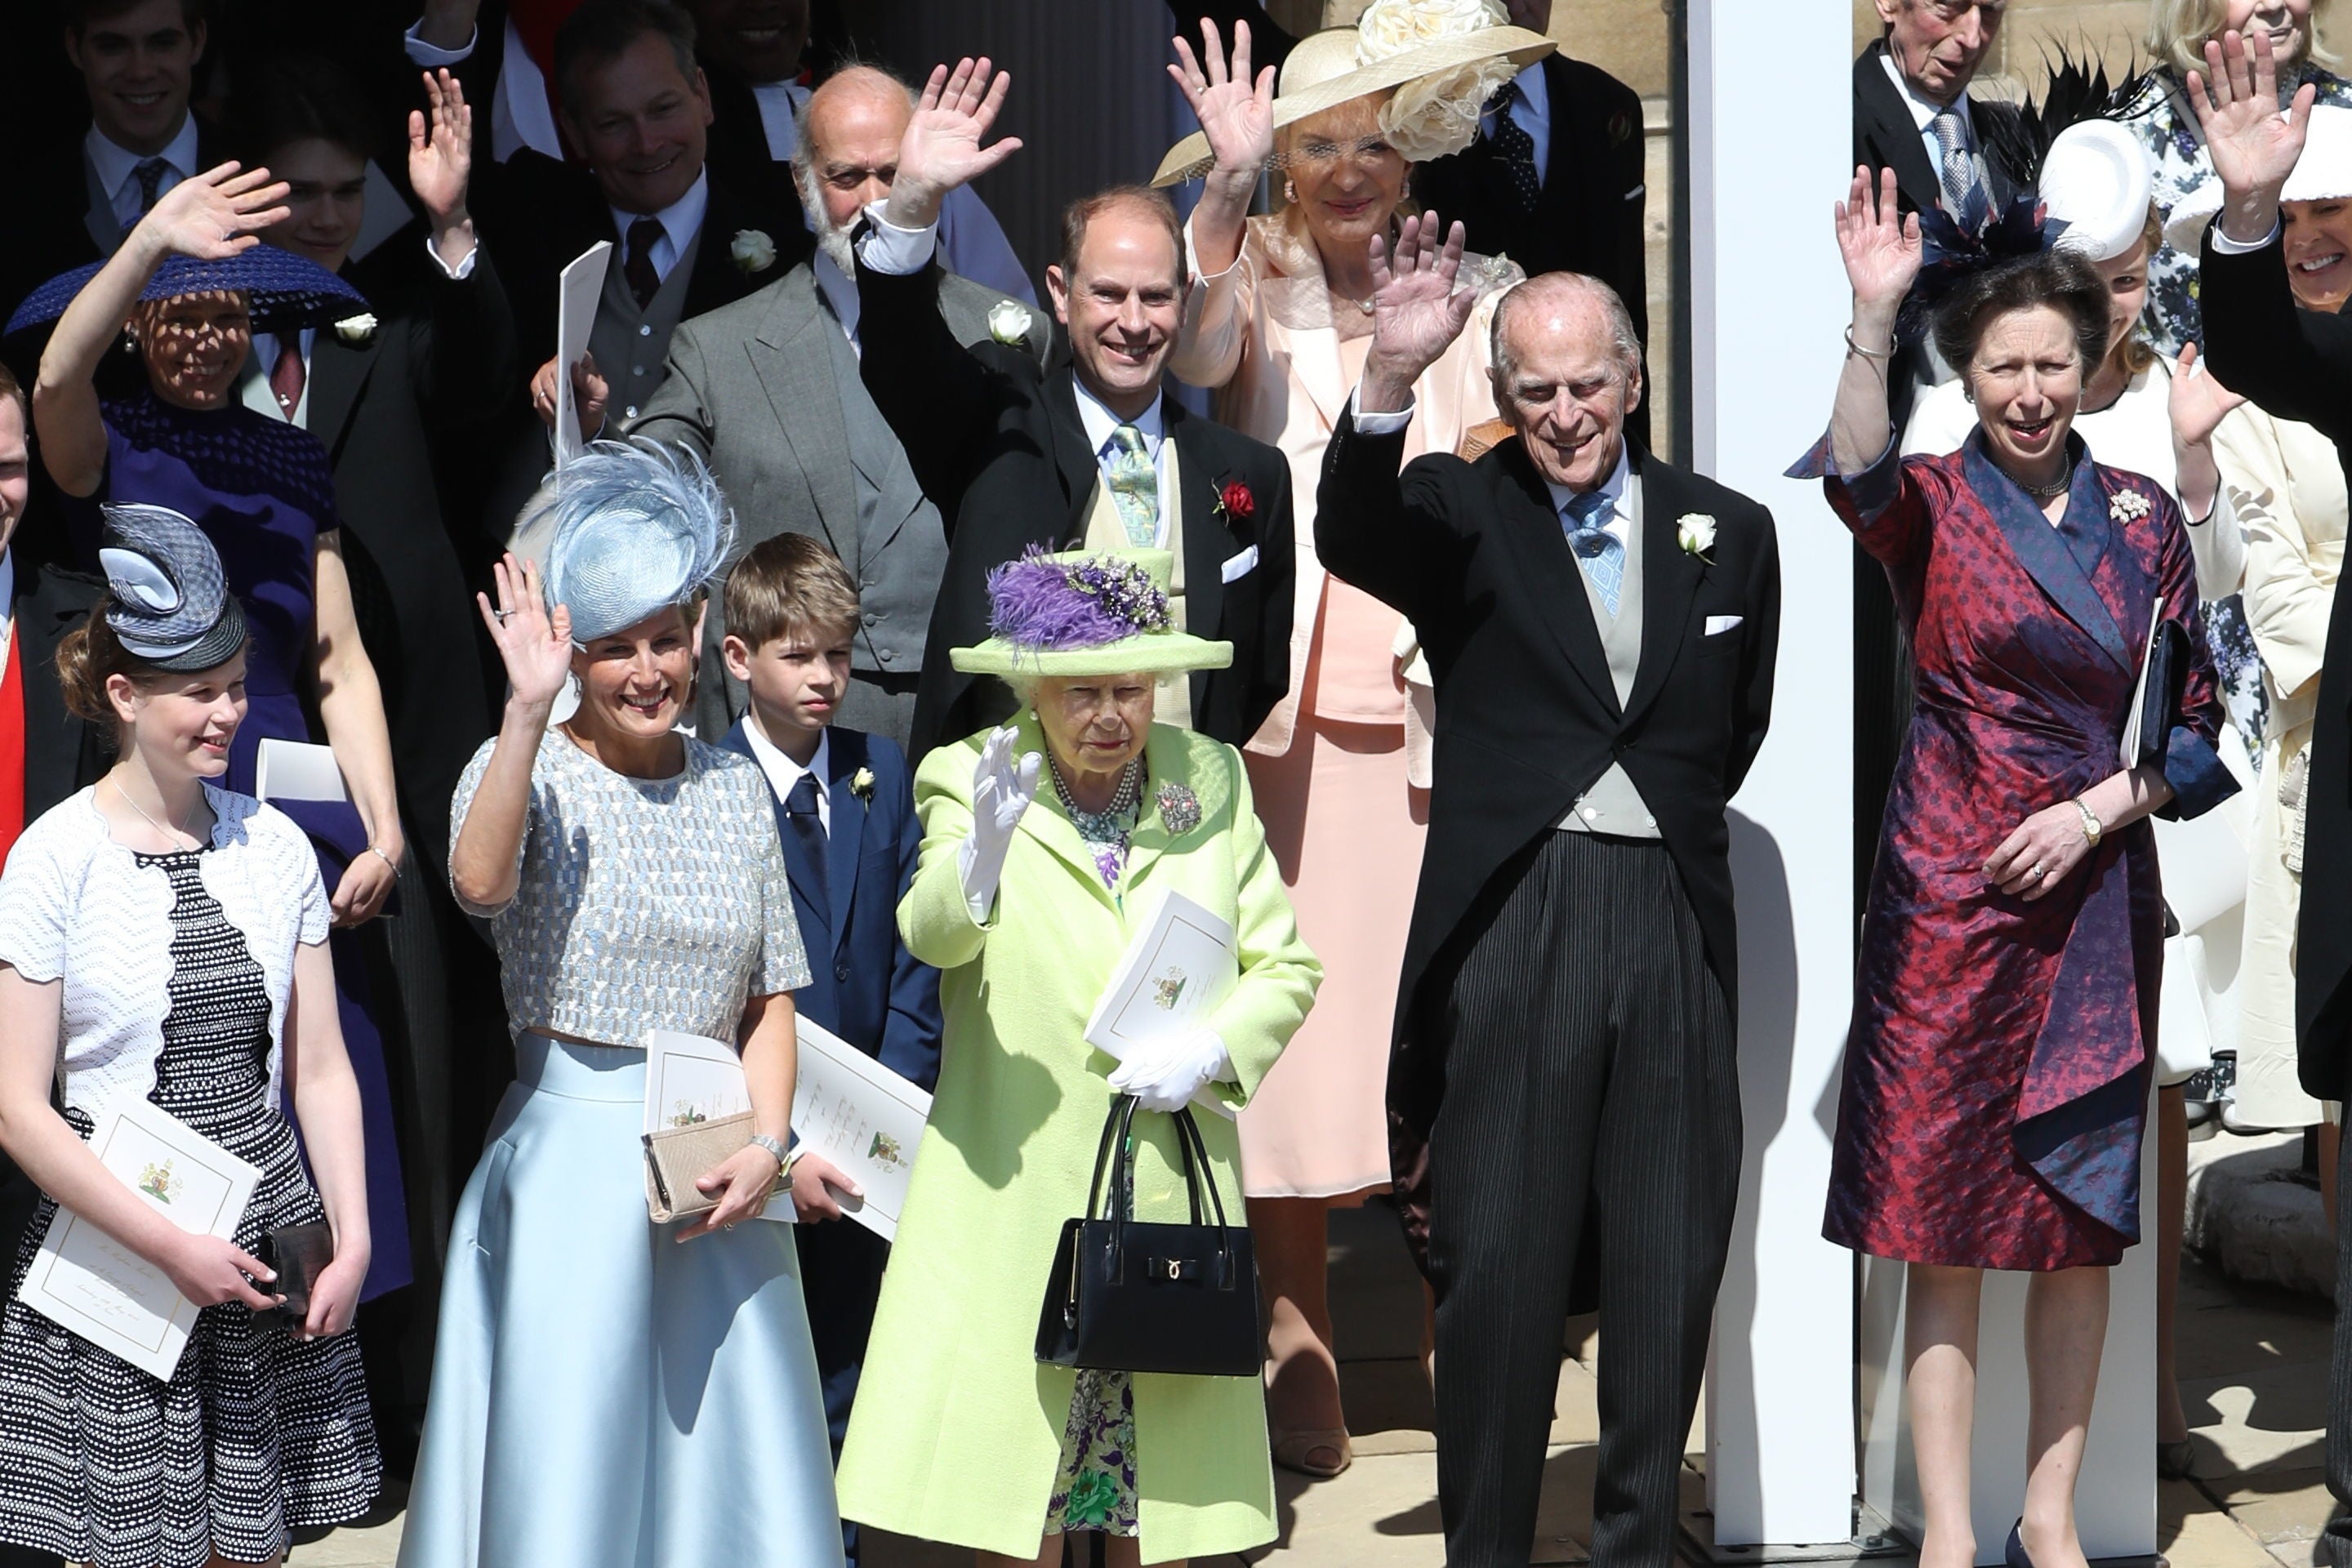 The Queen waves at Prince Harry and Meghan after their wedding in 2018